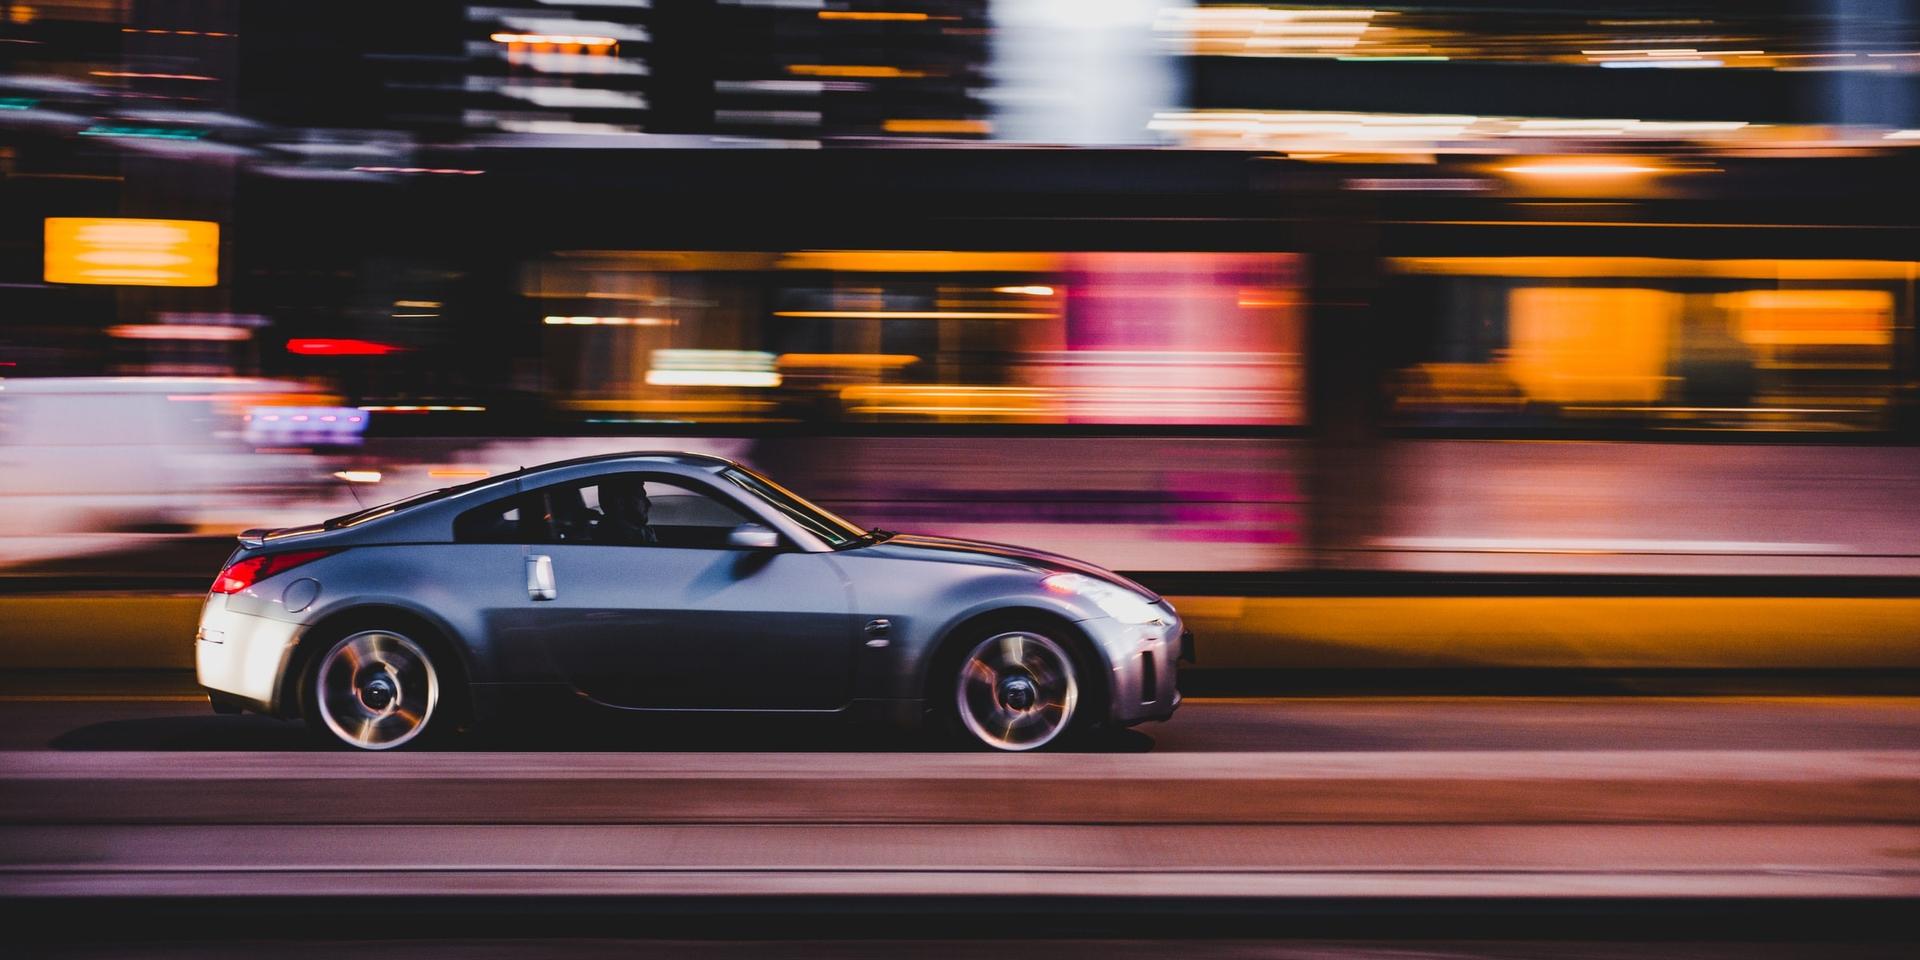 Panning photo of grey coupe on road